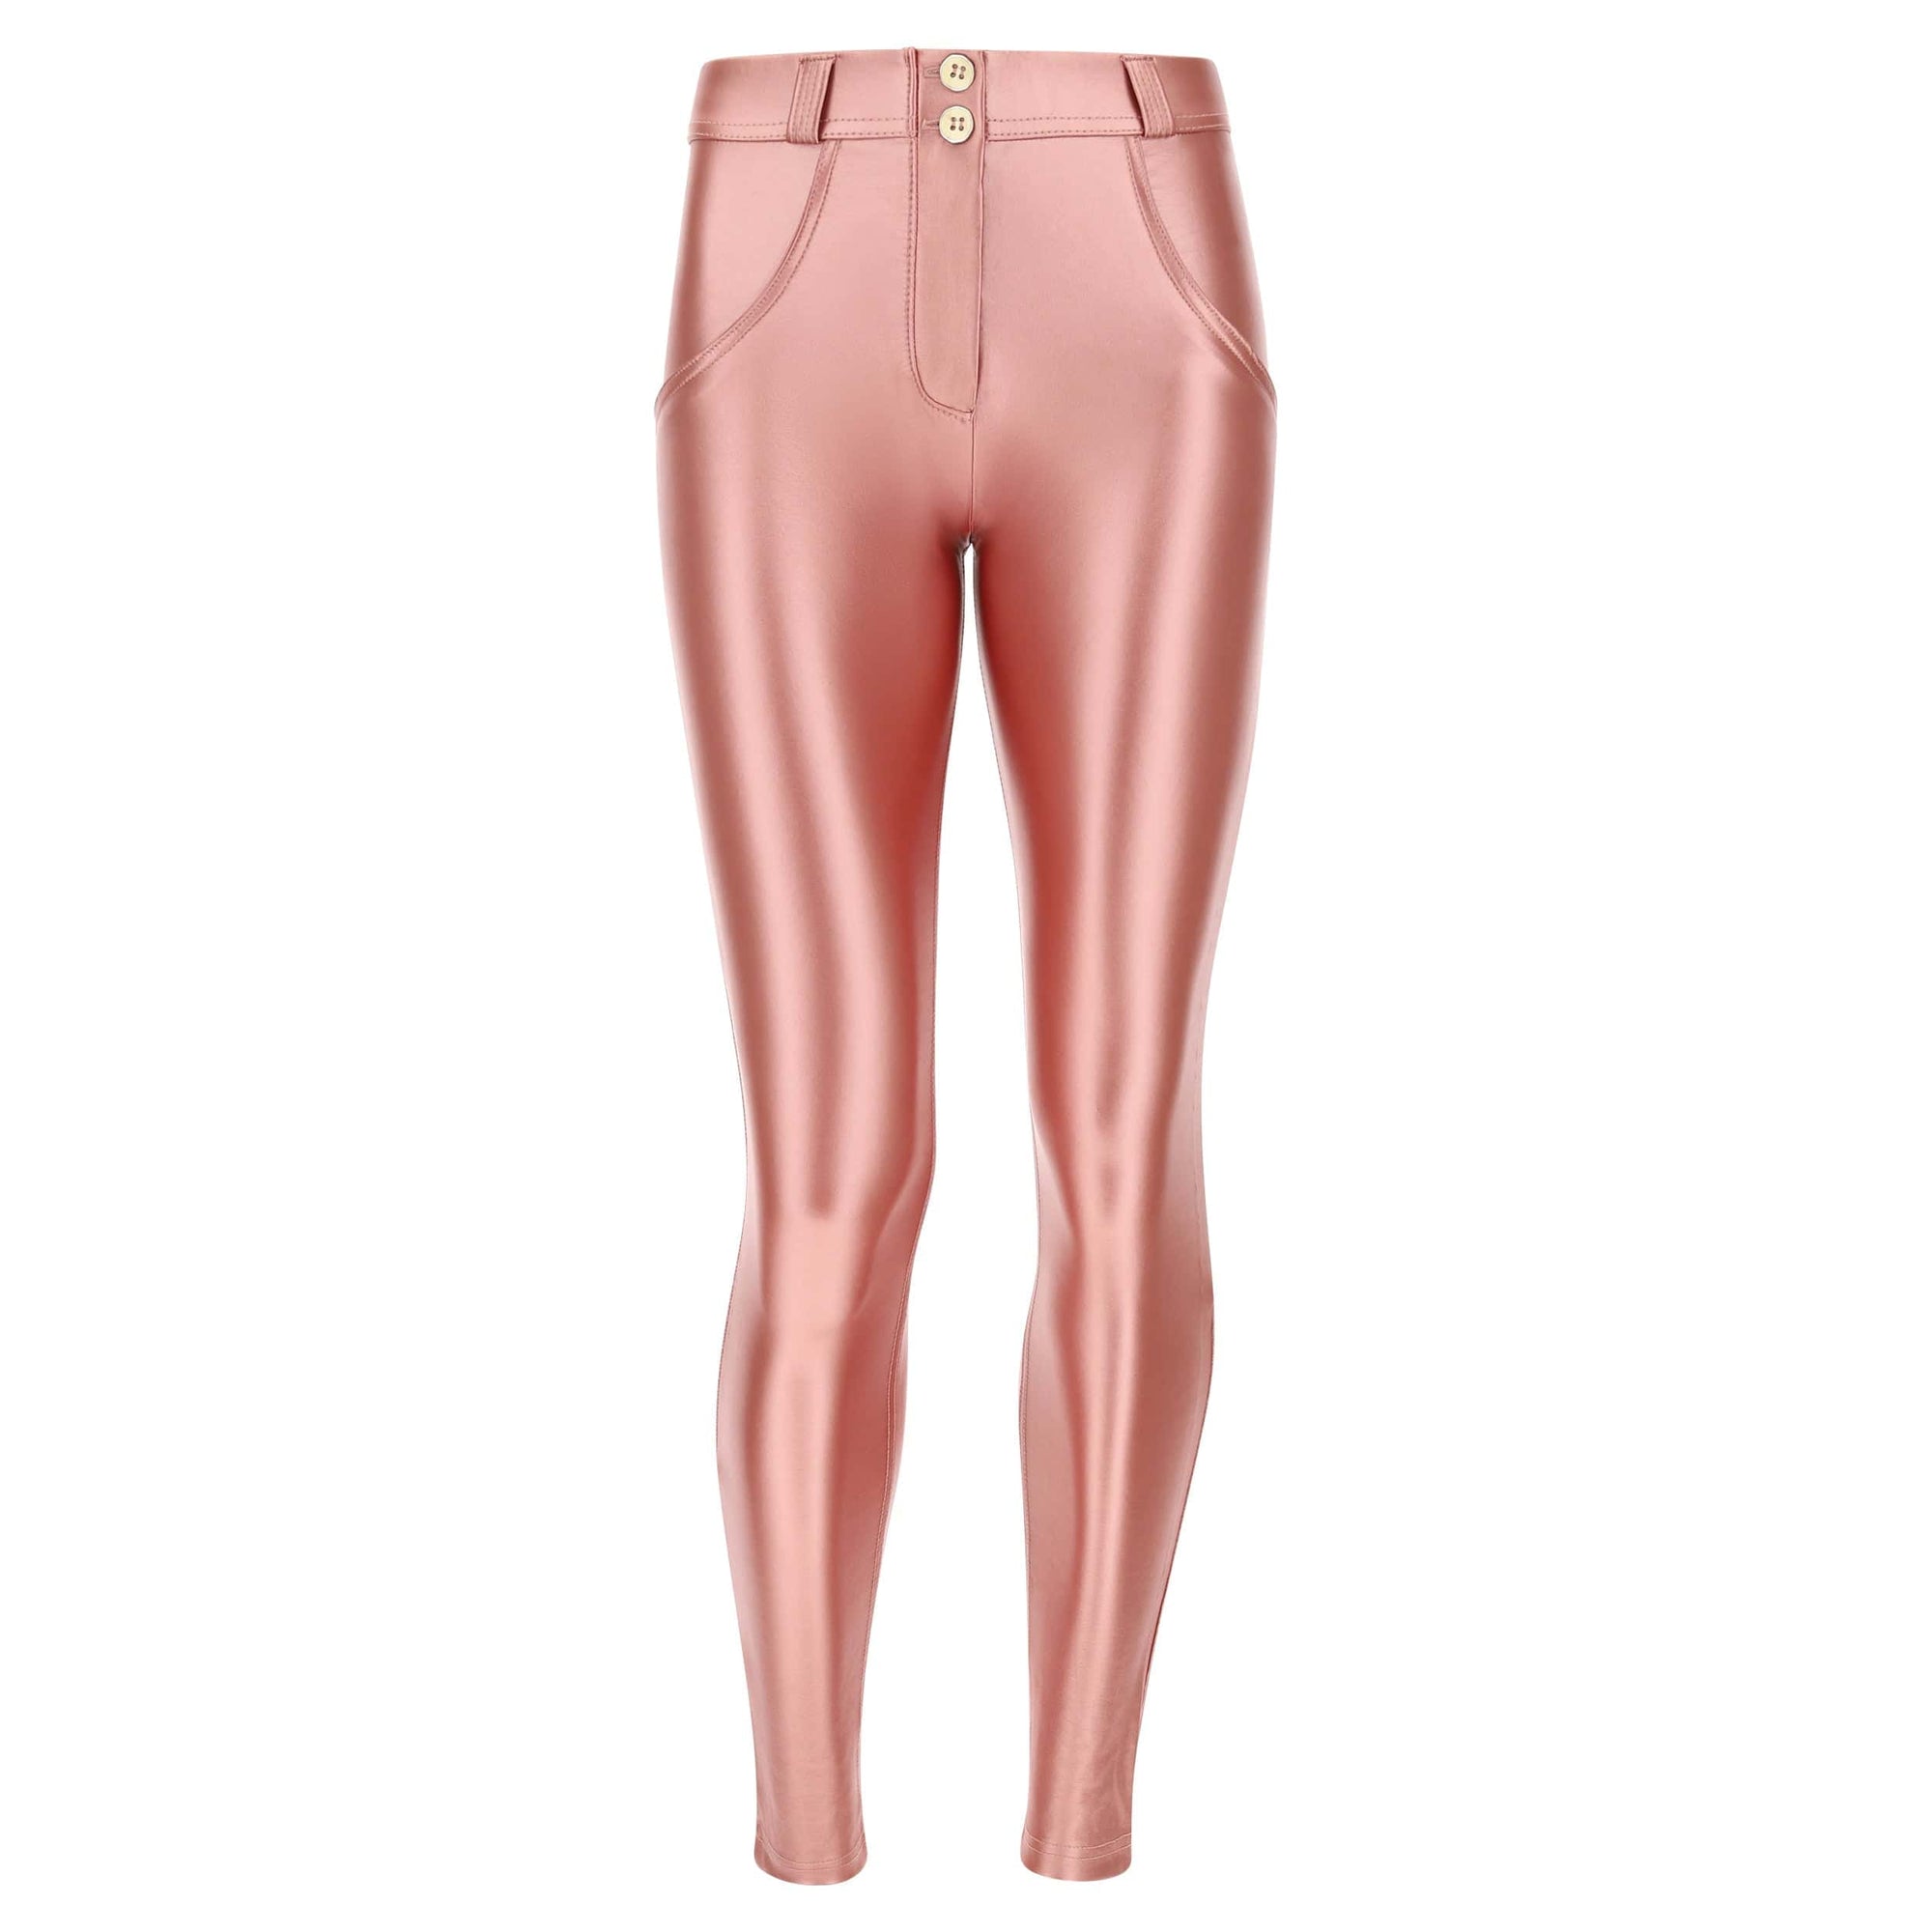 WR.UP Metallic Faux Leather - Mid Rise - Full Length - Pink 2